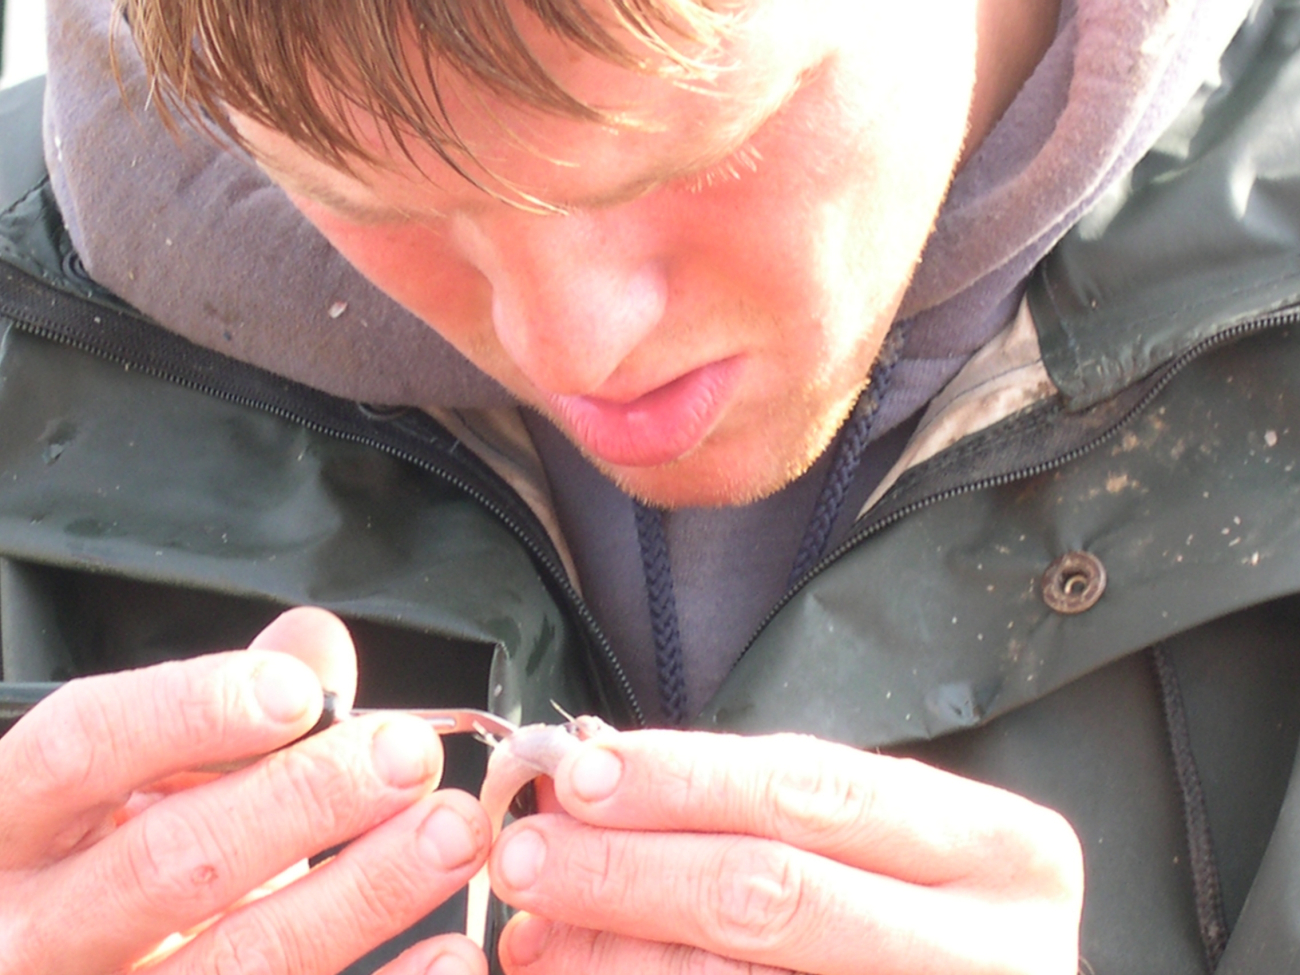 NOAA chartered fishing vessel crewman Mike Retherford identifying the sex ofan extremely small Pacific Grenadier (Coryphaenoides acrolepis) during the2003 west coast groundfish trawl survey aboard the F/V Excalibur